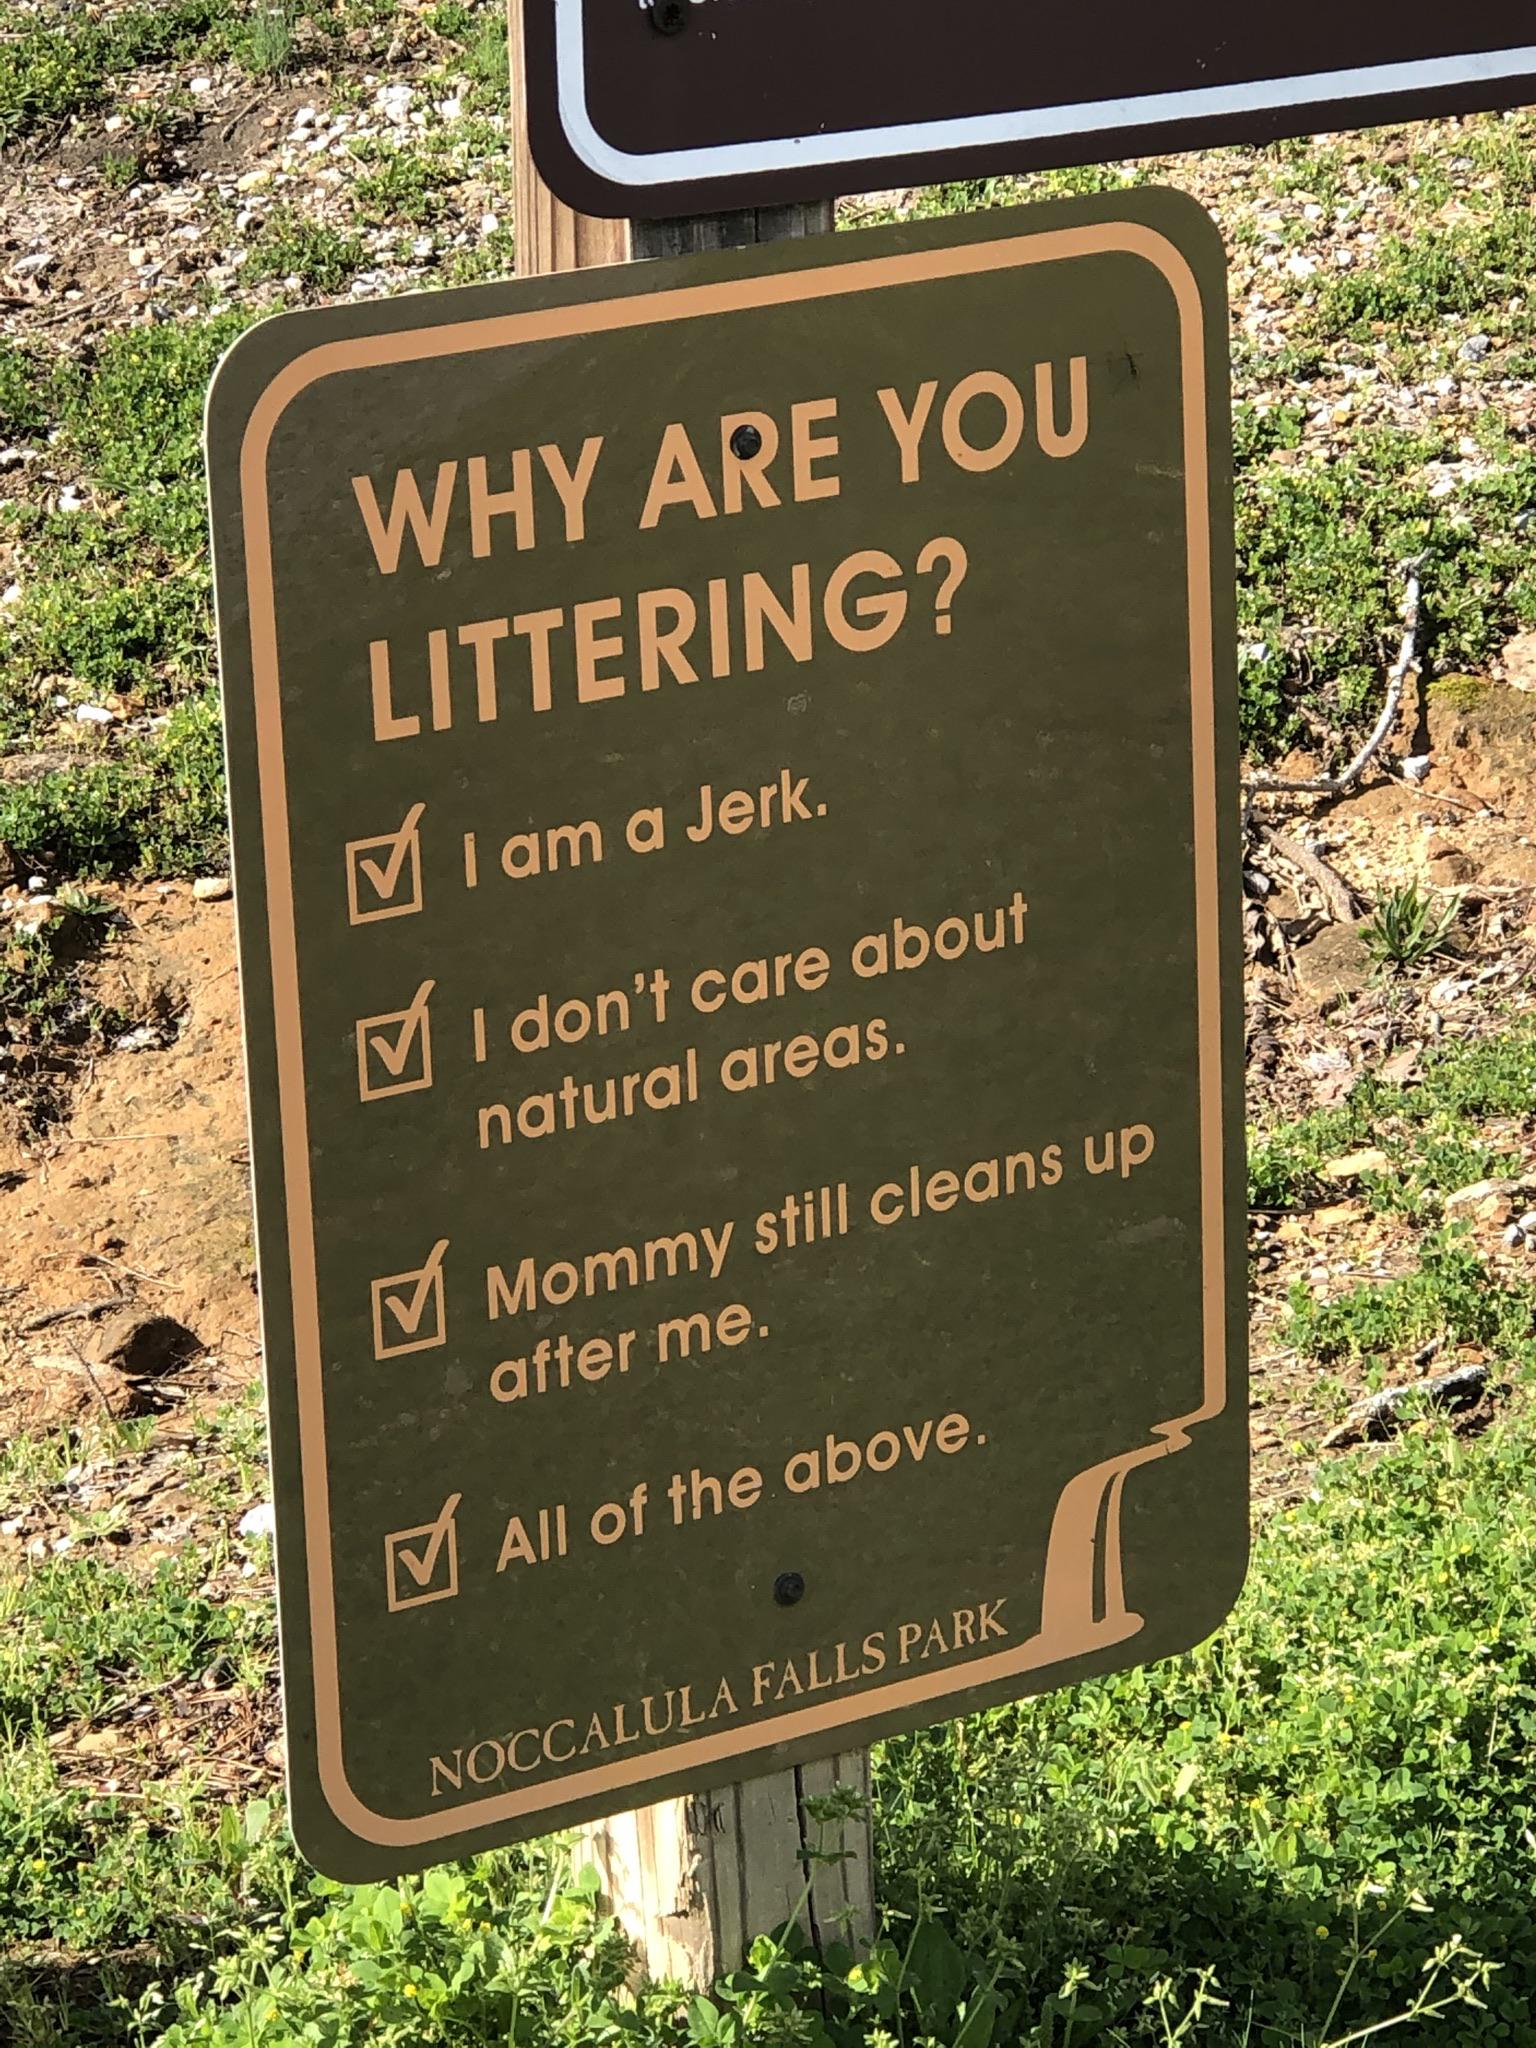 nature reserve - Why Are You Littering? I am a Jerk I don't care about natural areas Mommy still cleans up after me. All of the above. Noccalula Falls Park